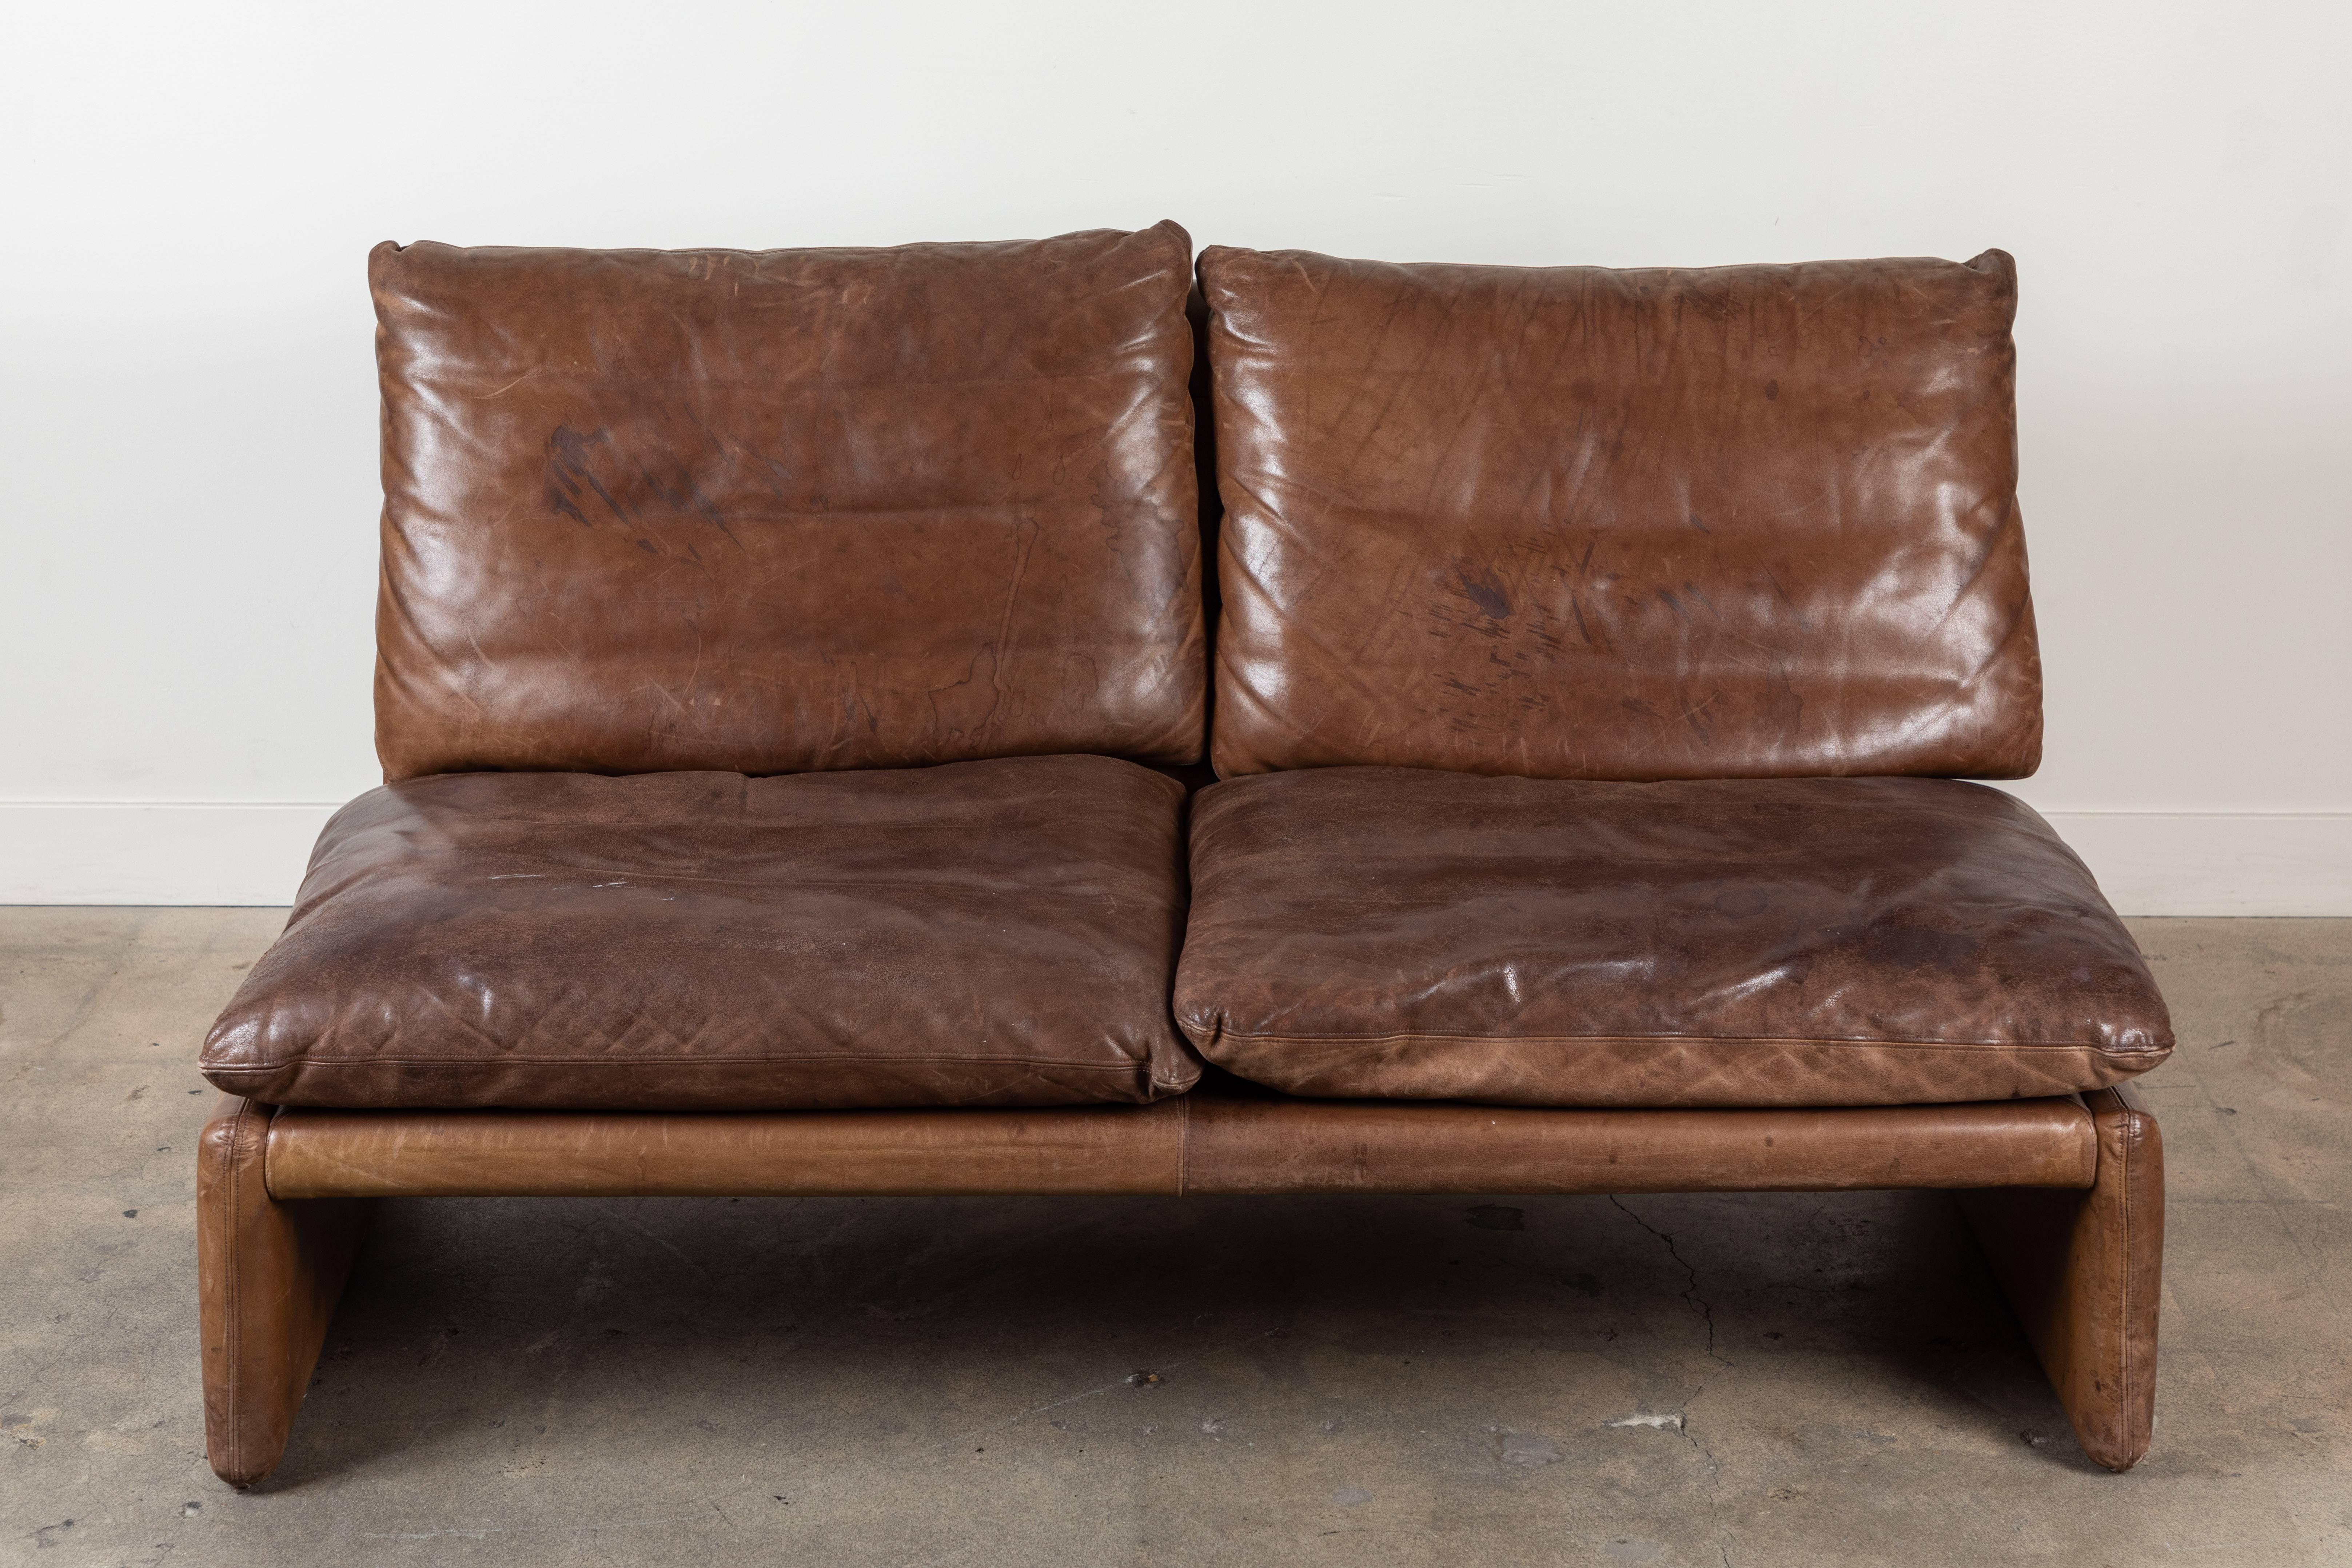 Vintage leather loveseat by COR Germany. Pair available.